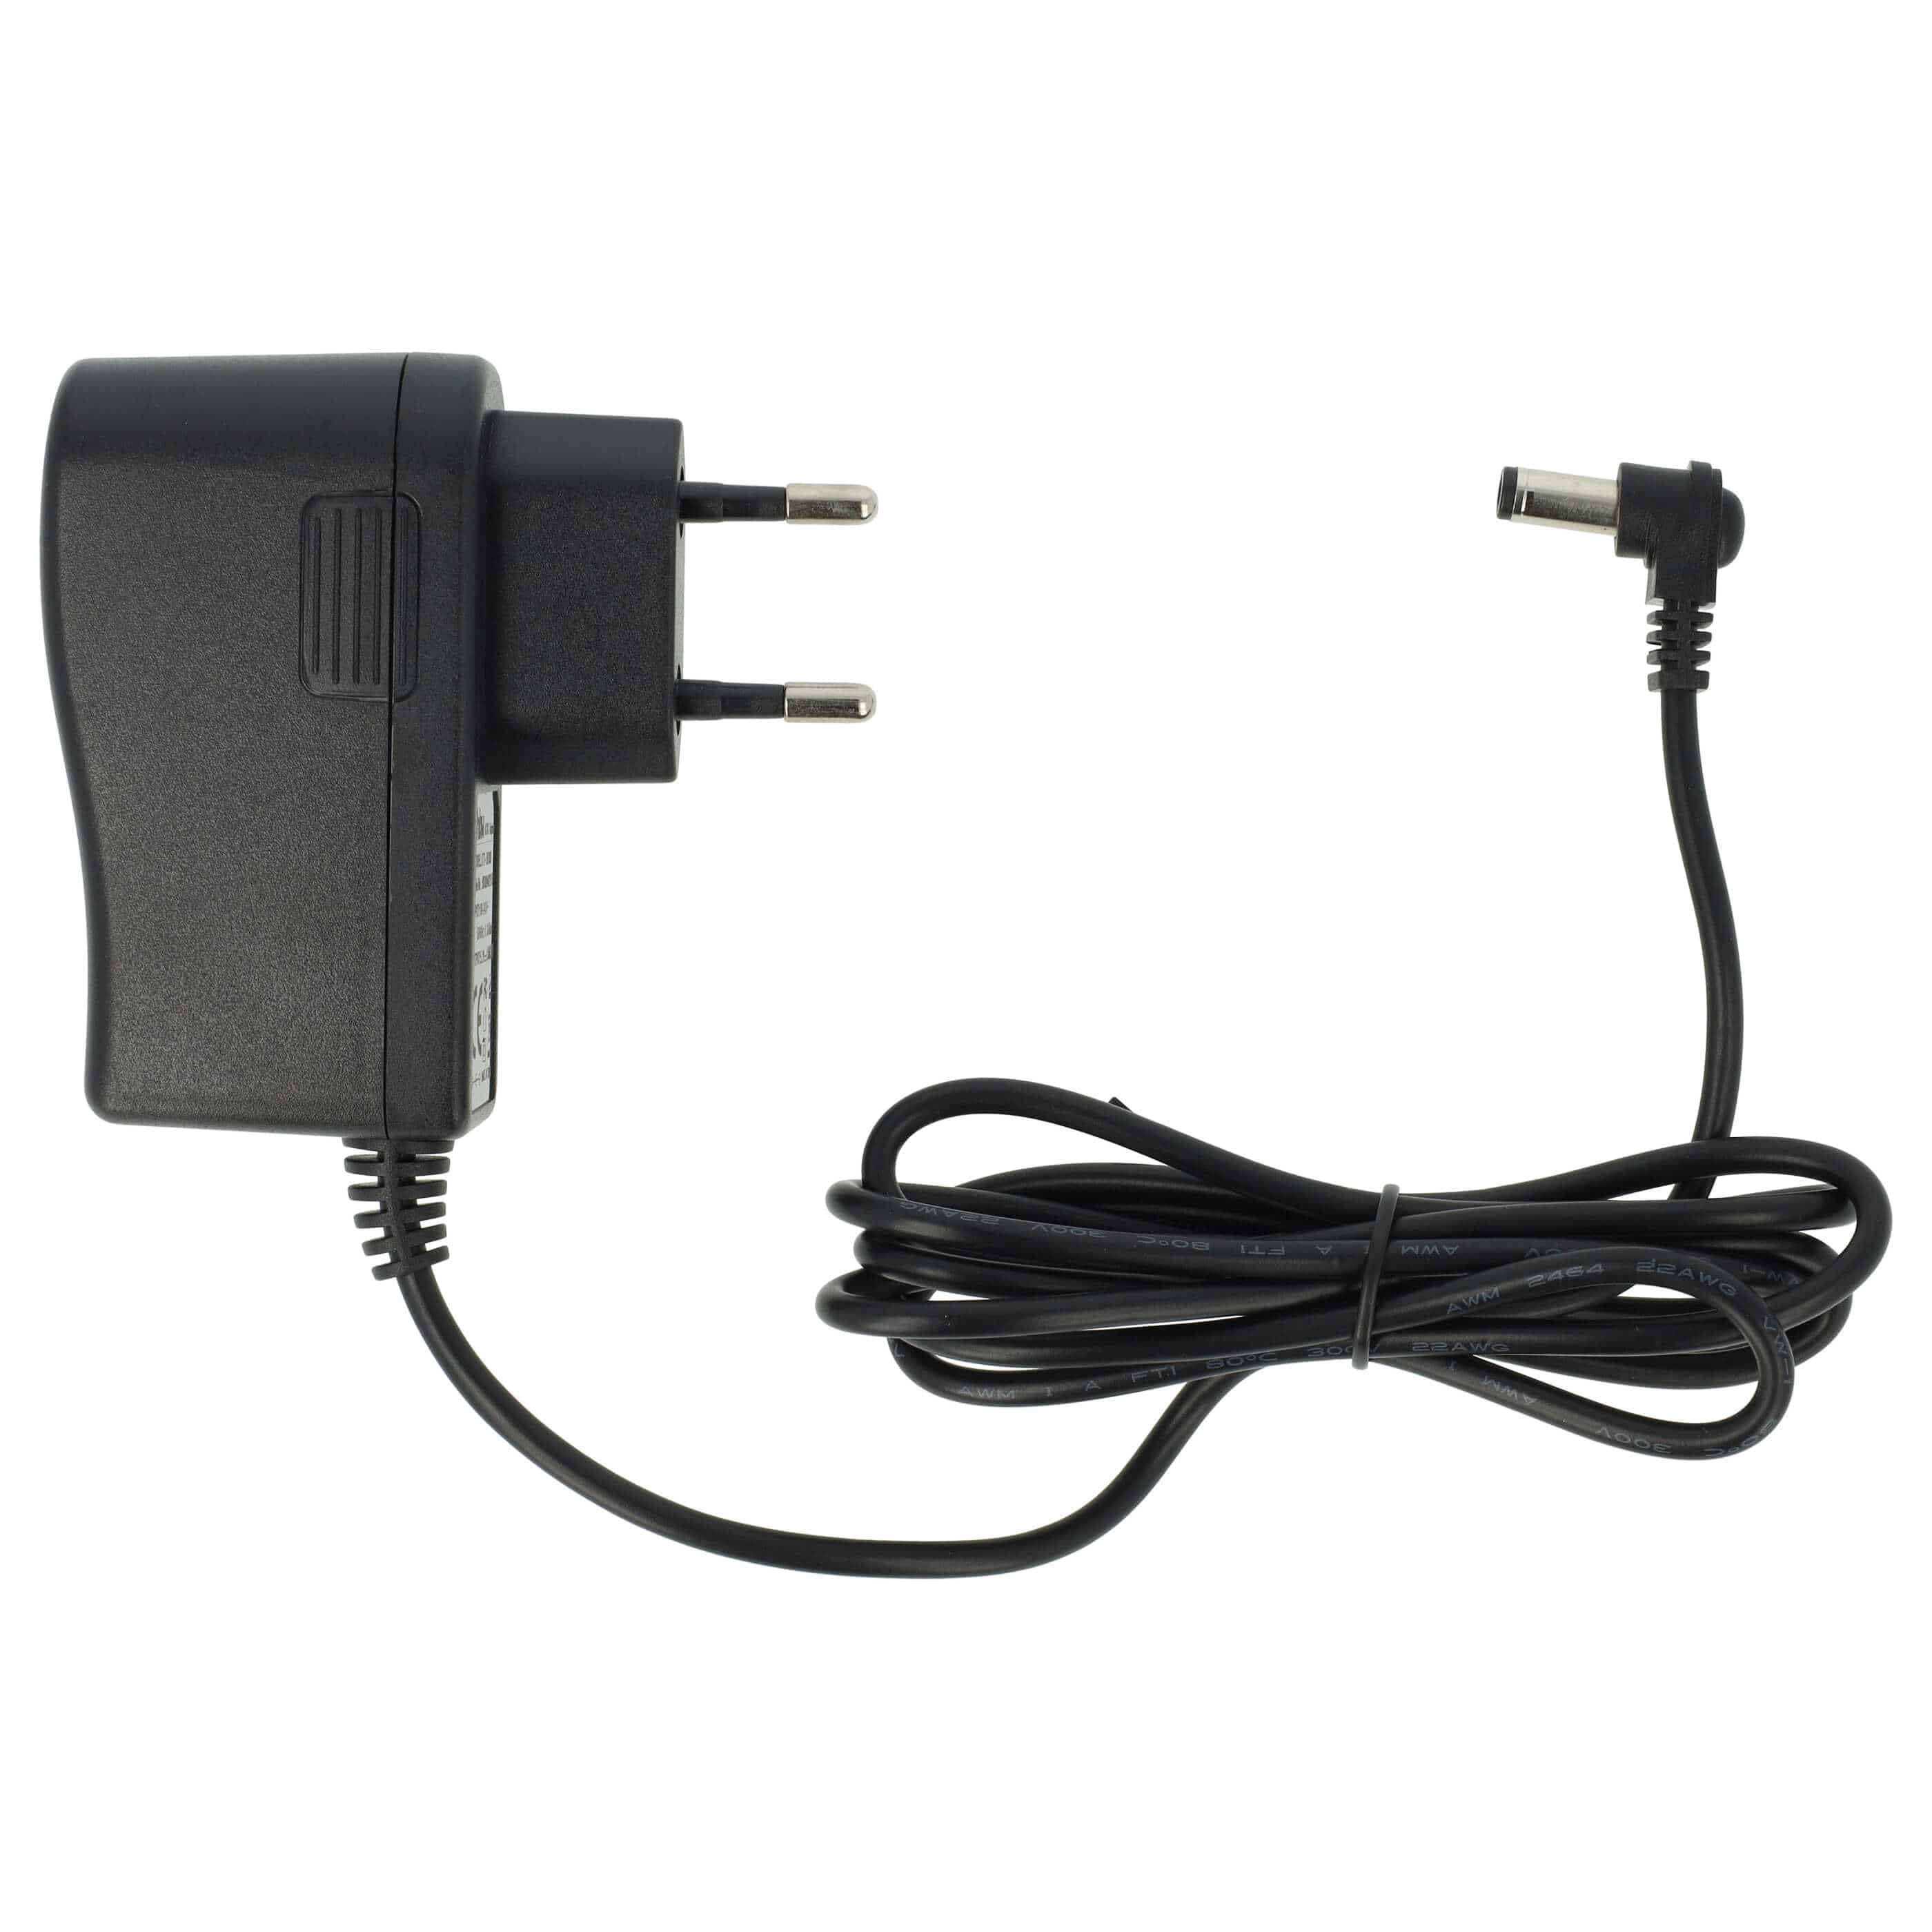 Mains Power Adapter replaces Honeywell 6124 R2JK-5650 for Honeywell Barcode Scanner, Handheld POS Scanner